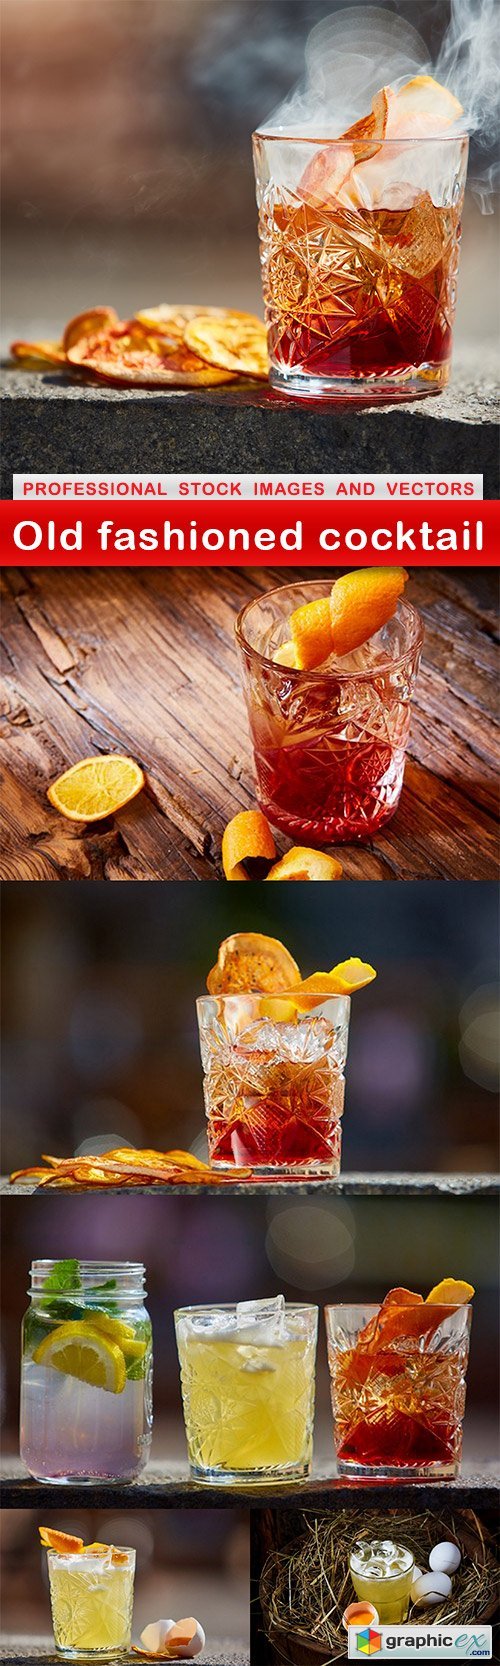 Old fashioned cocktail - 6 UHQ JPEG